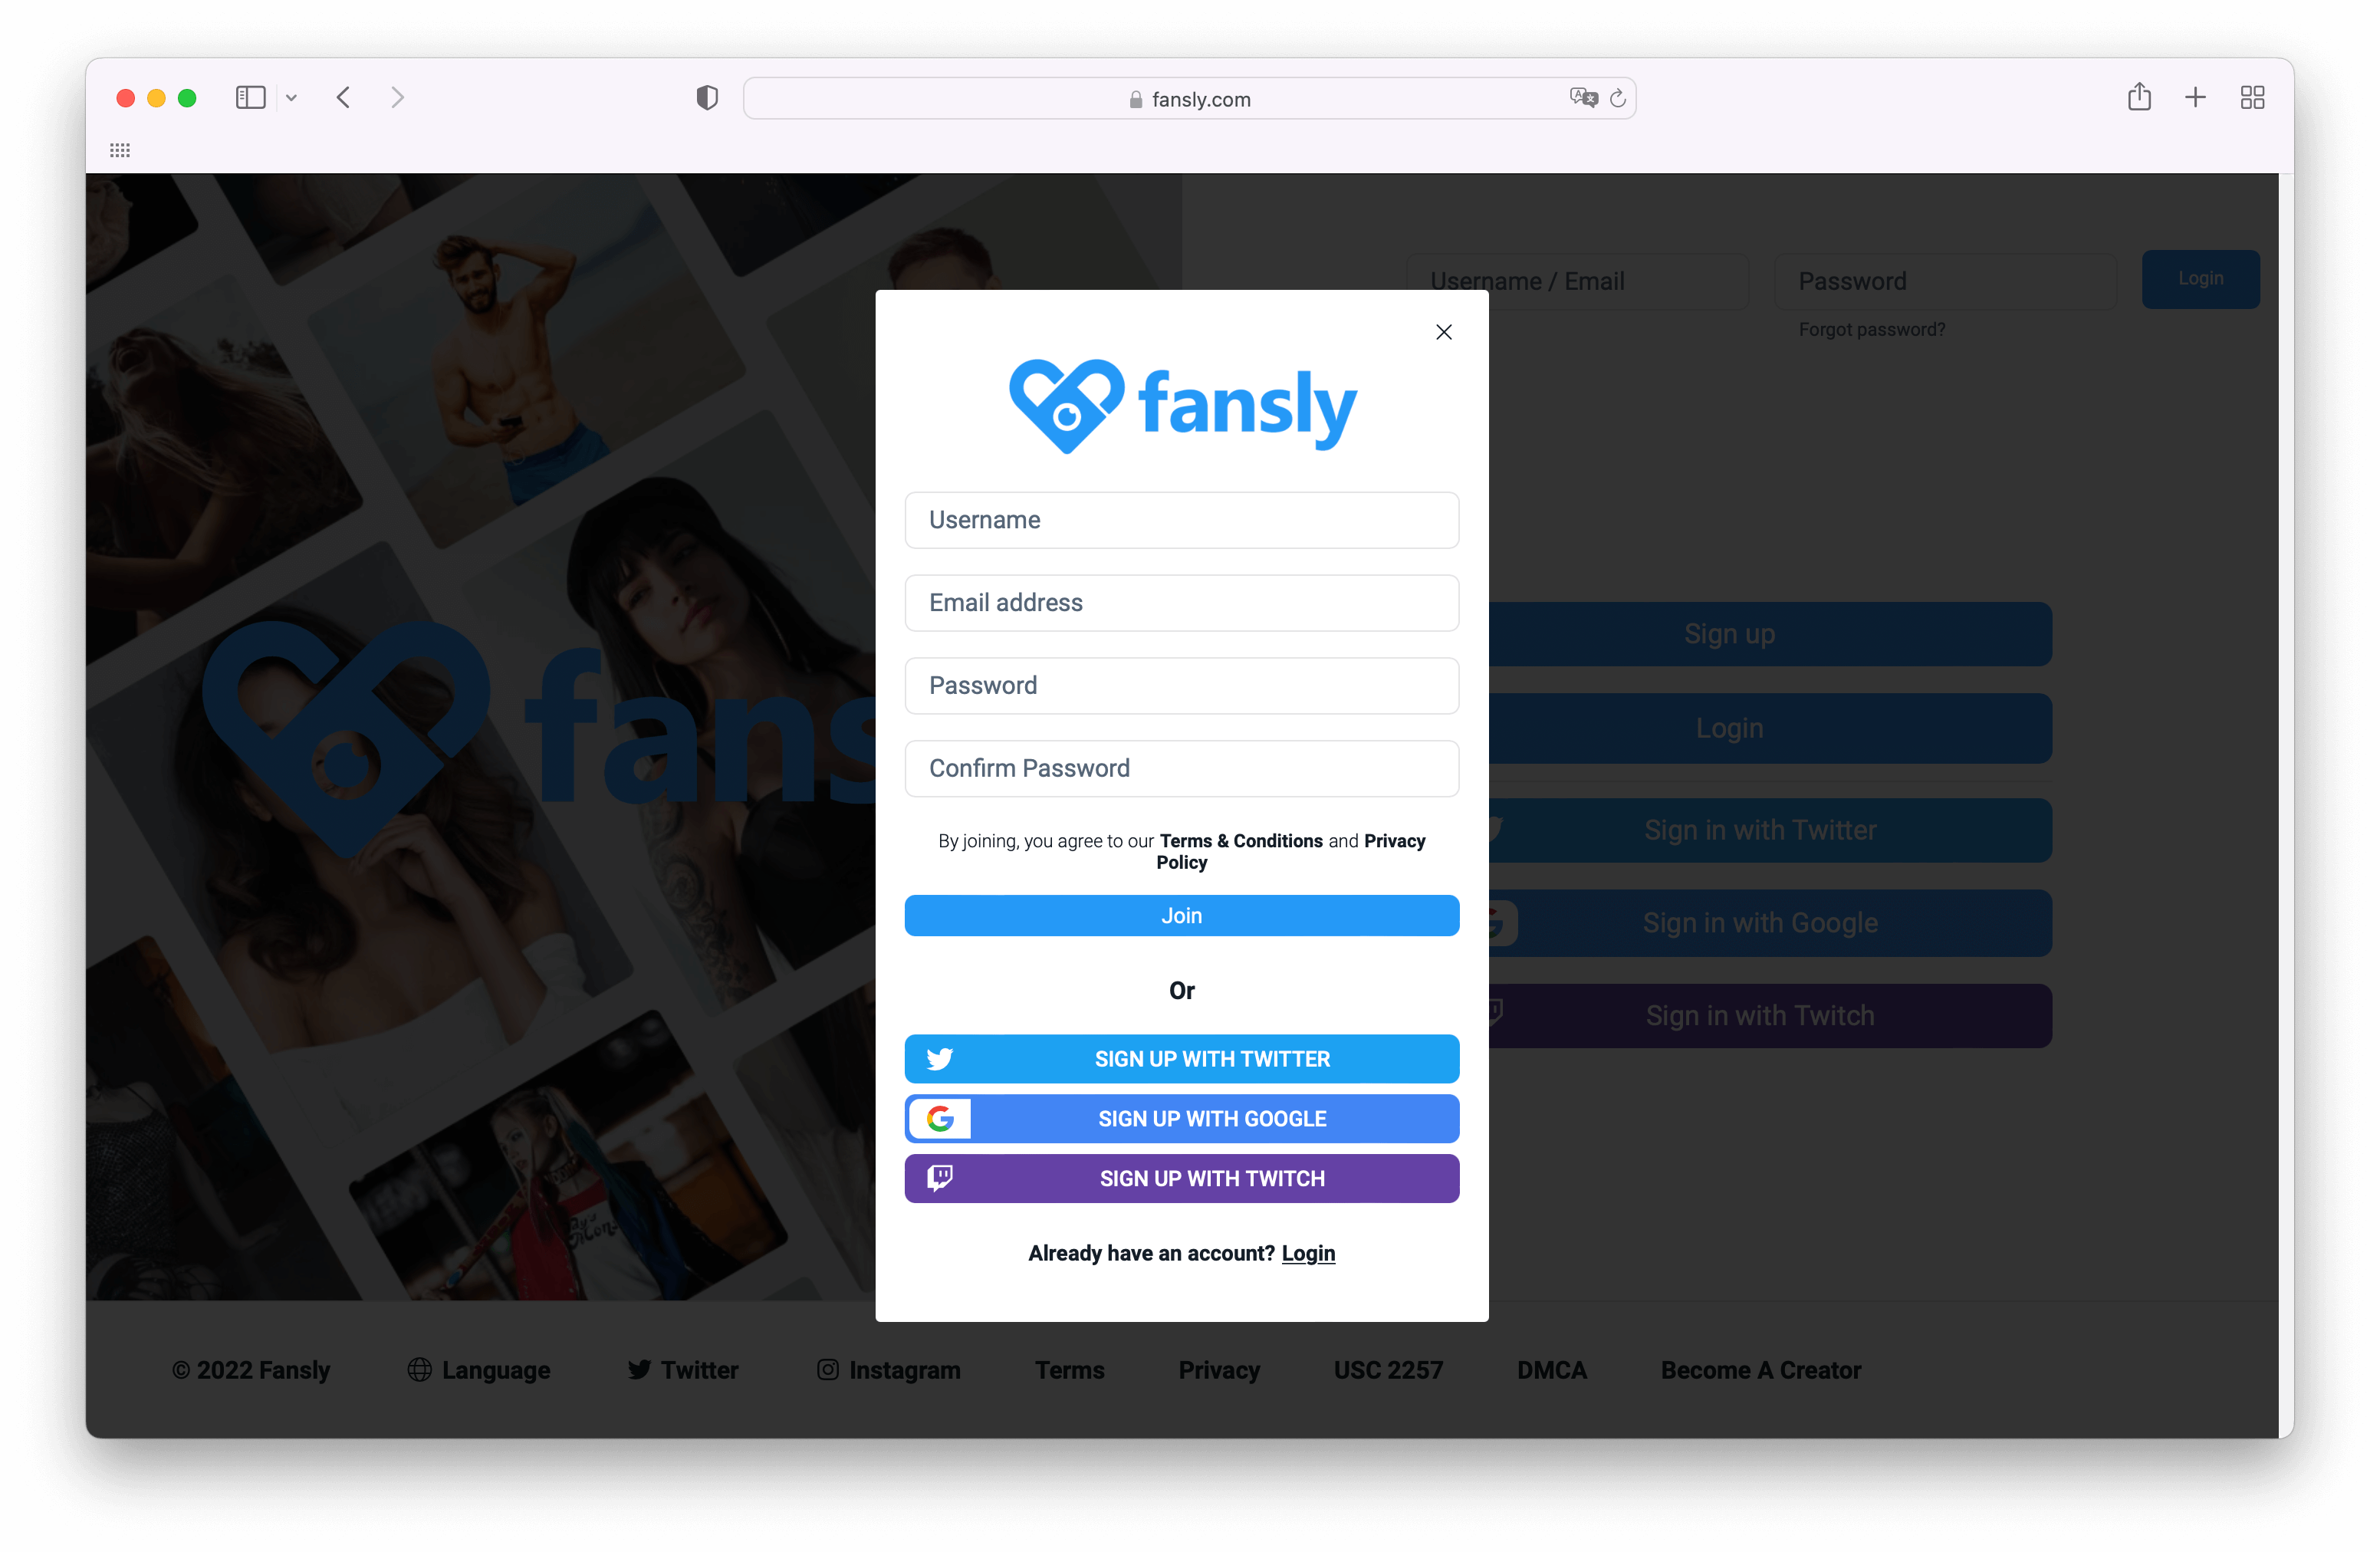 Fansly account finder